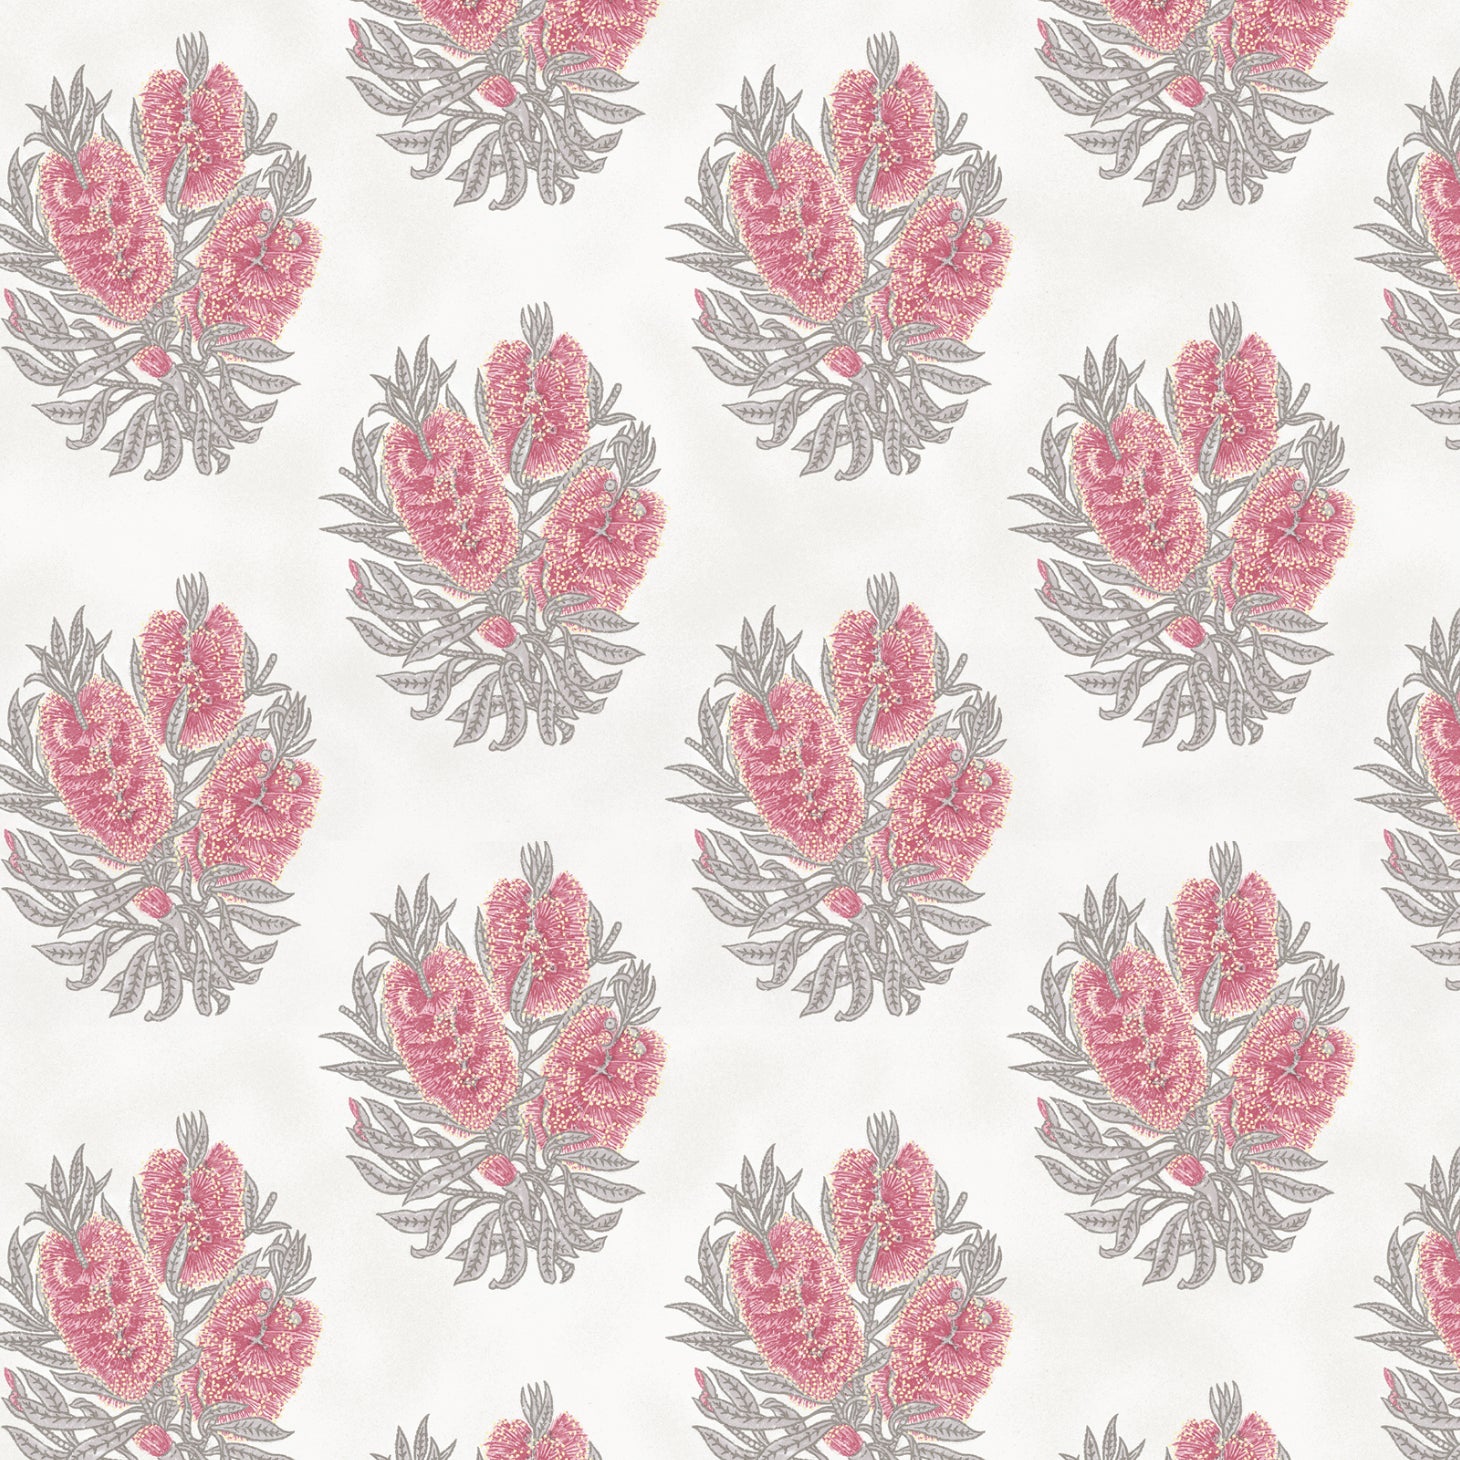 Detail of wallpaper in a floral cameo print in dusty rose and gray on a white field.